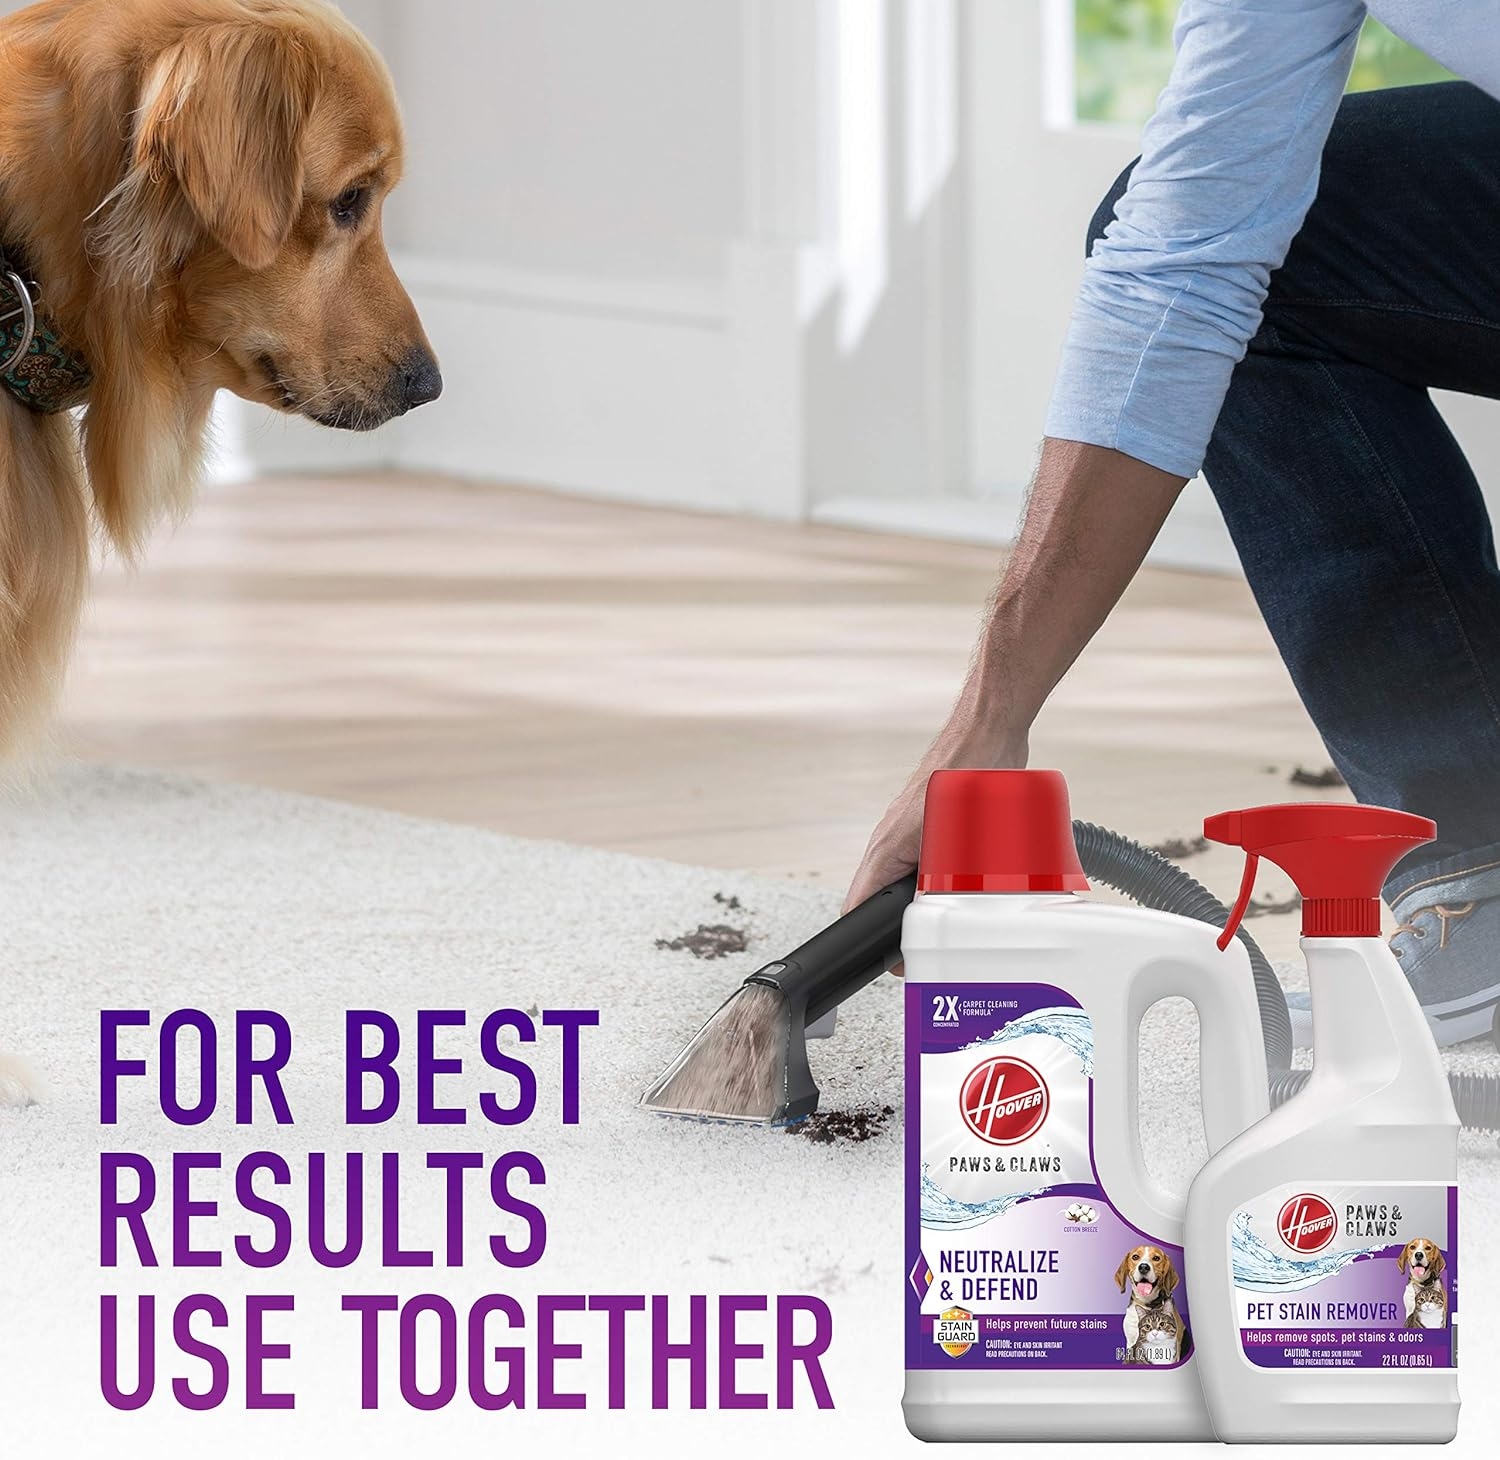 Hoover Paws & Claws Deep Cleaning Carpet Shampoo with Stainguard, Concentrated Machine Cleaner Solution for Pets, 64oz Formula, AH30925, White